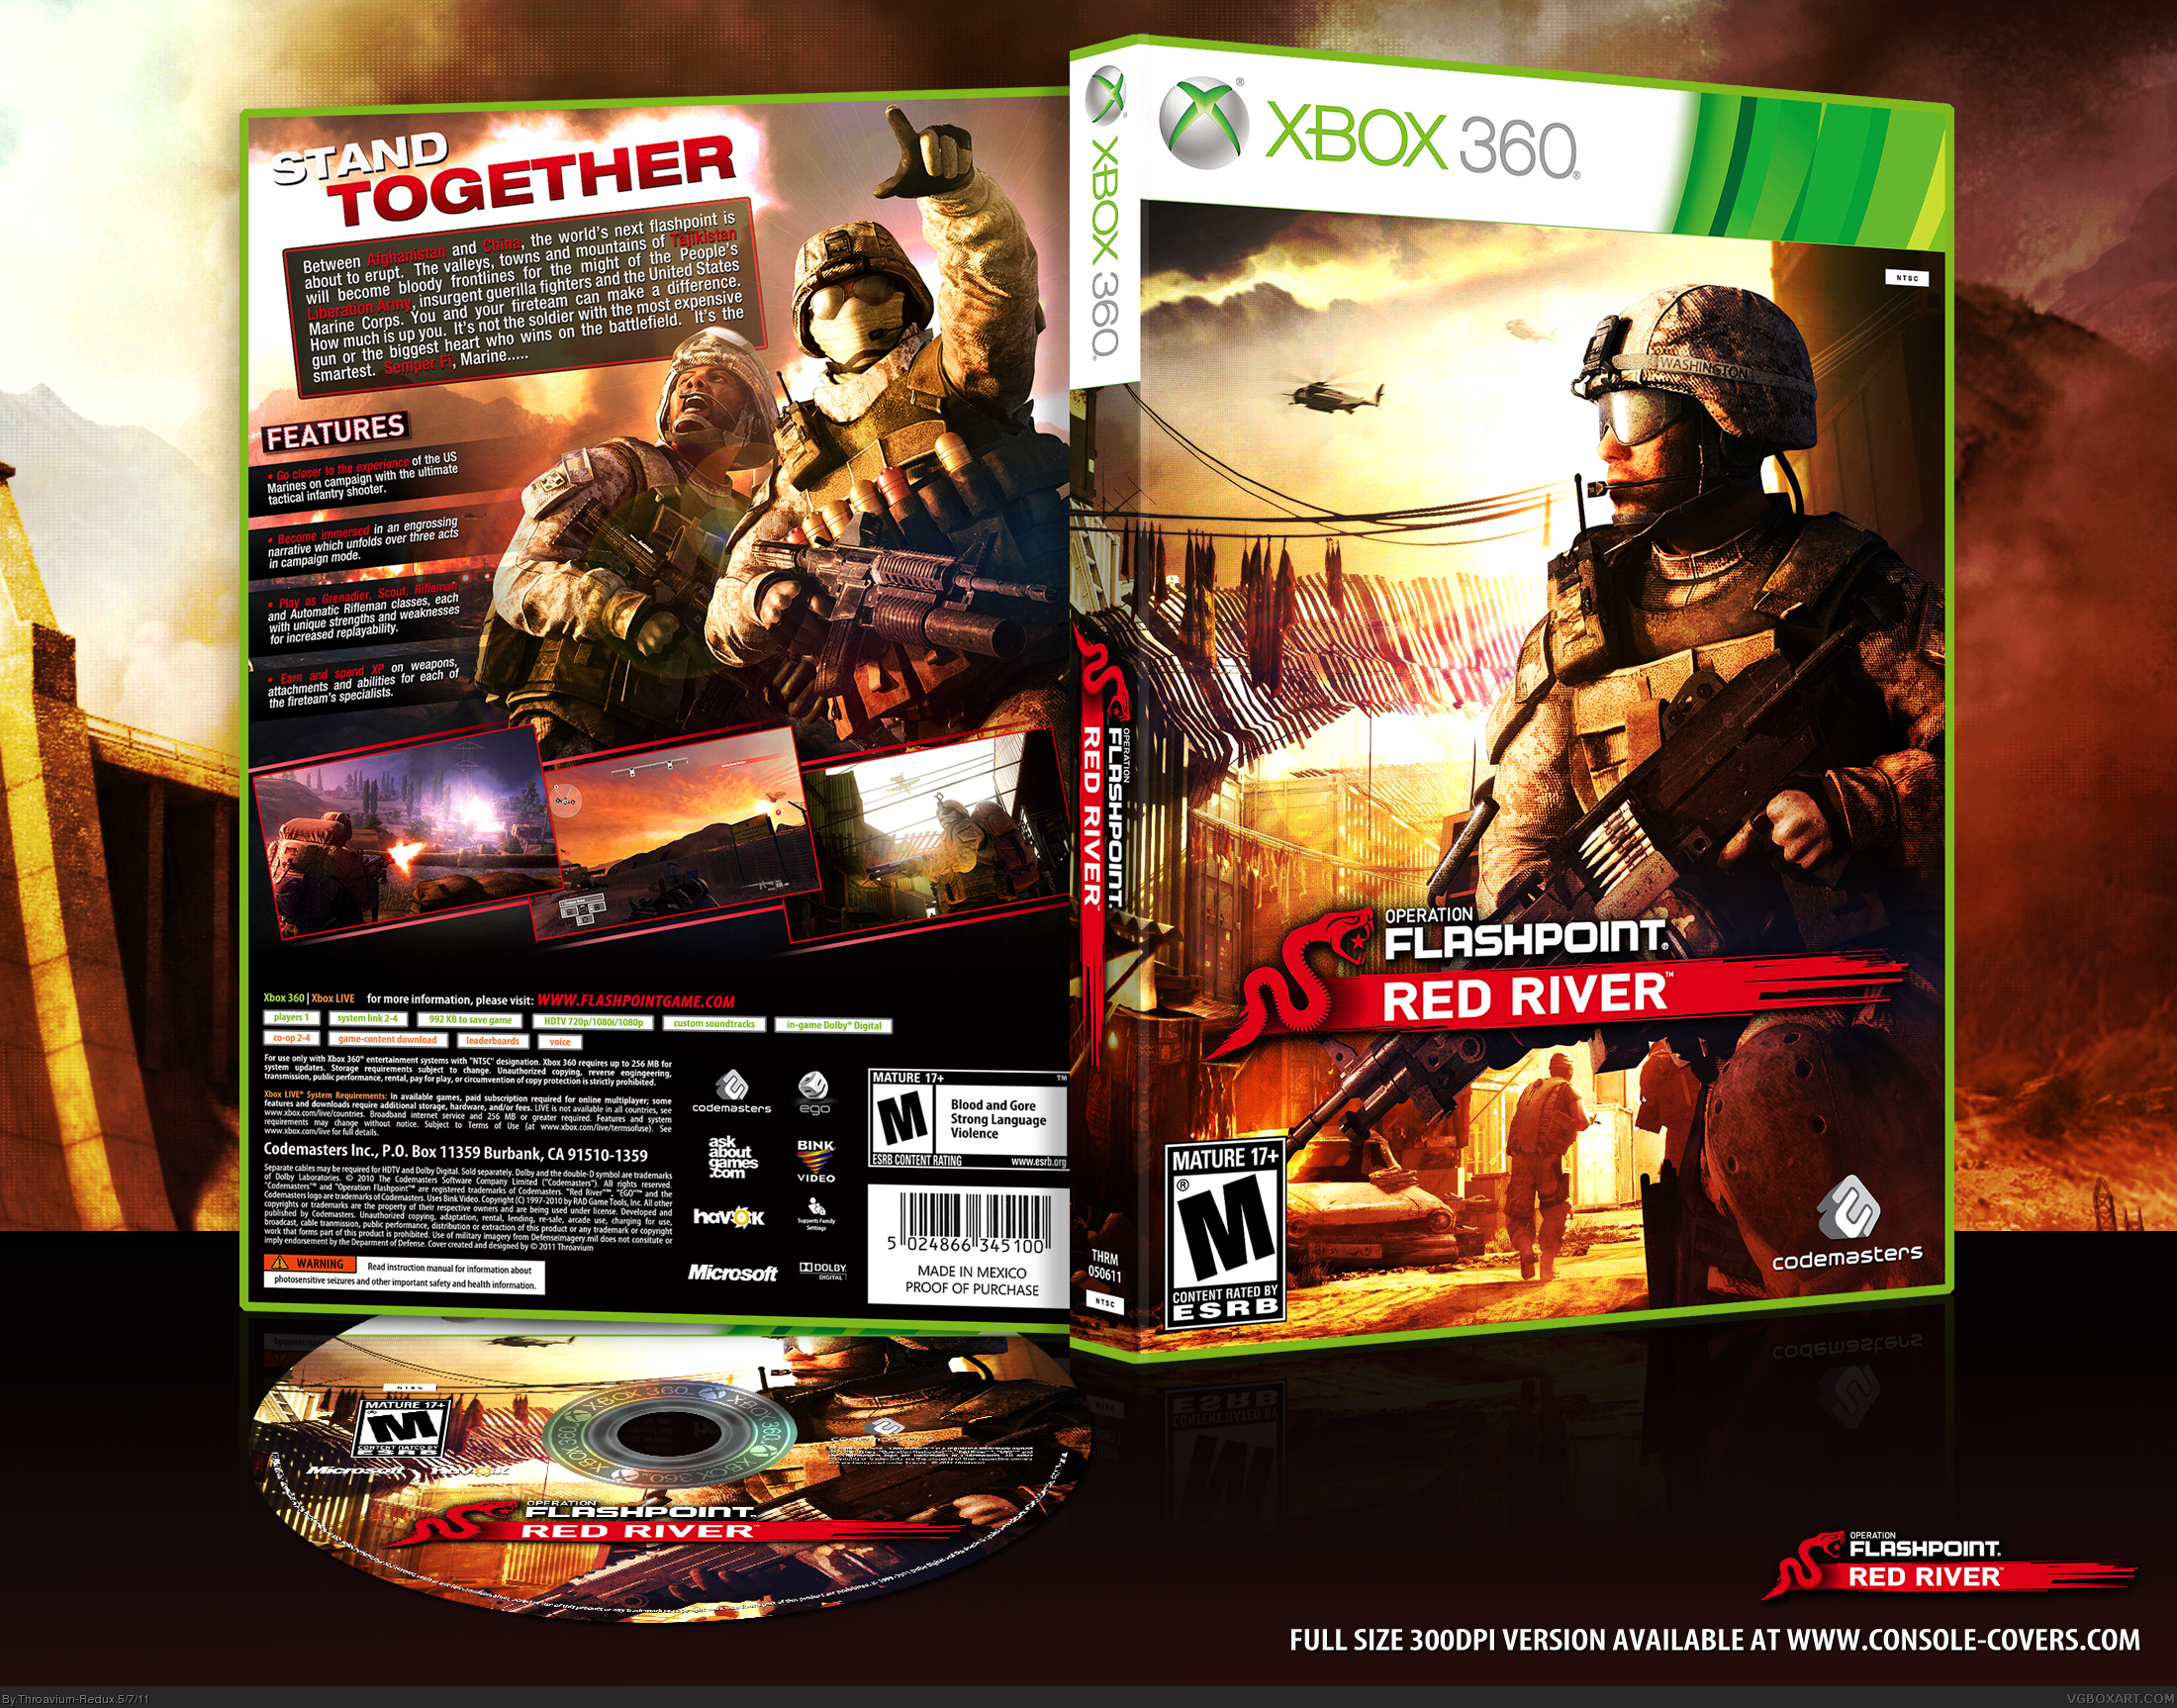 Operation Flashpoint: Red River box cover